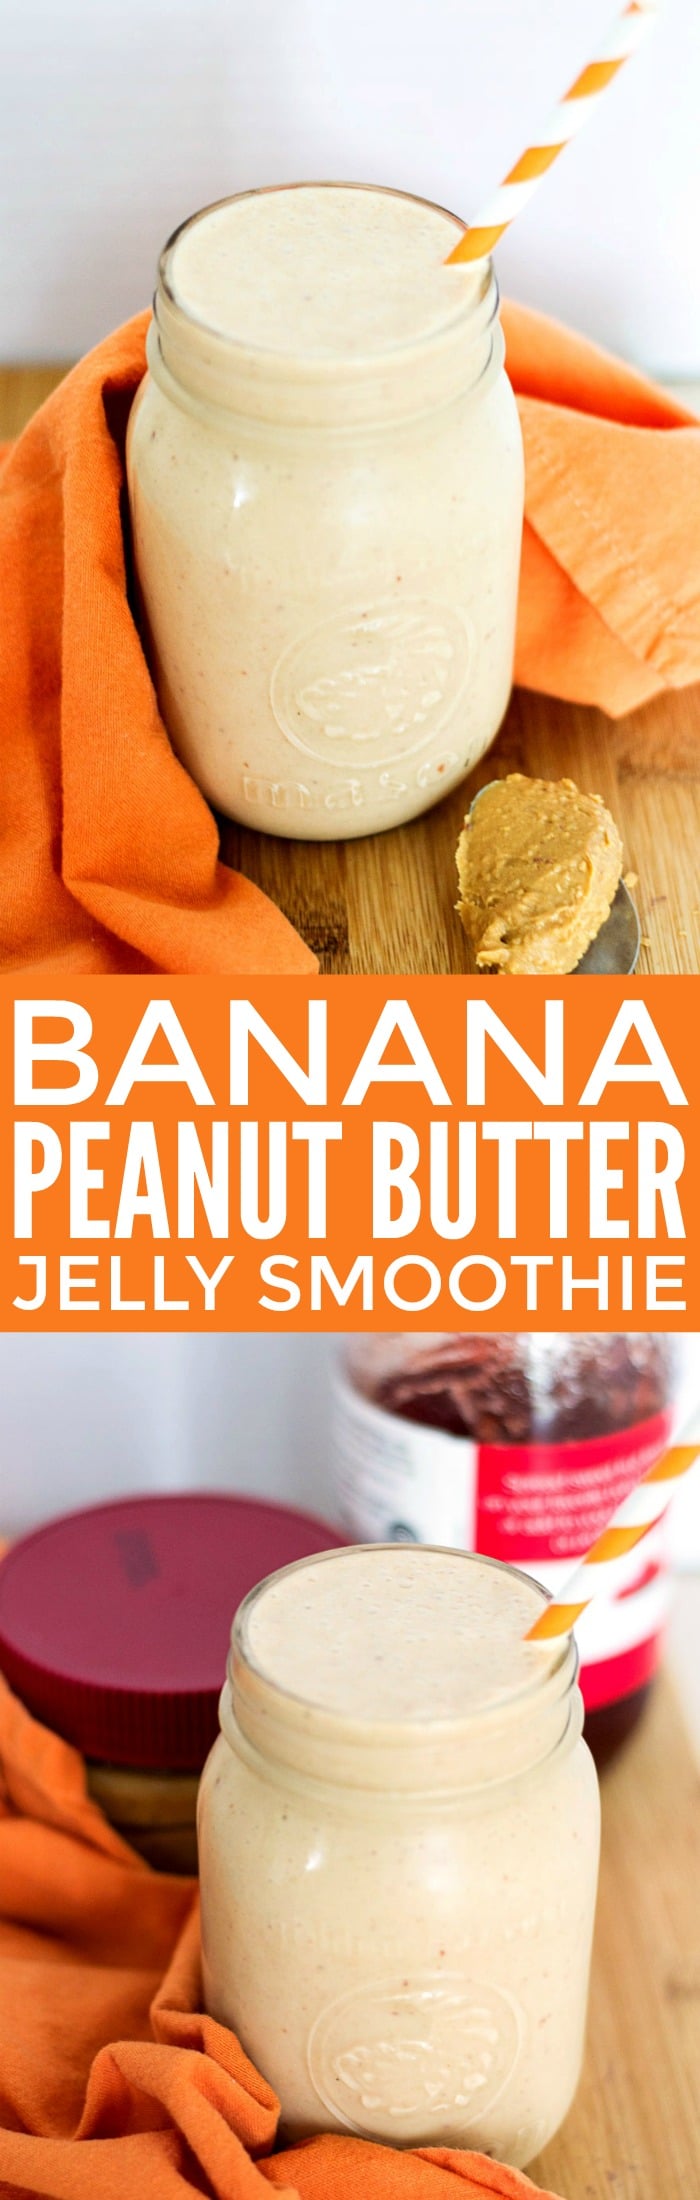 This creamy Peanut Butter Jelly Smoothie is a delicious way to fill up on the go. It's a great source of protein, and who doesn't love that classic PB&J combination?